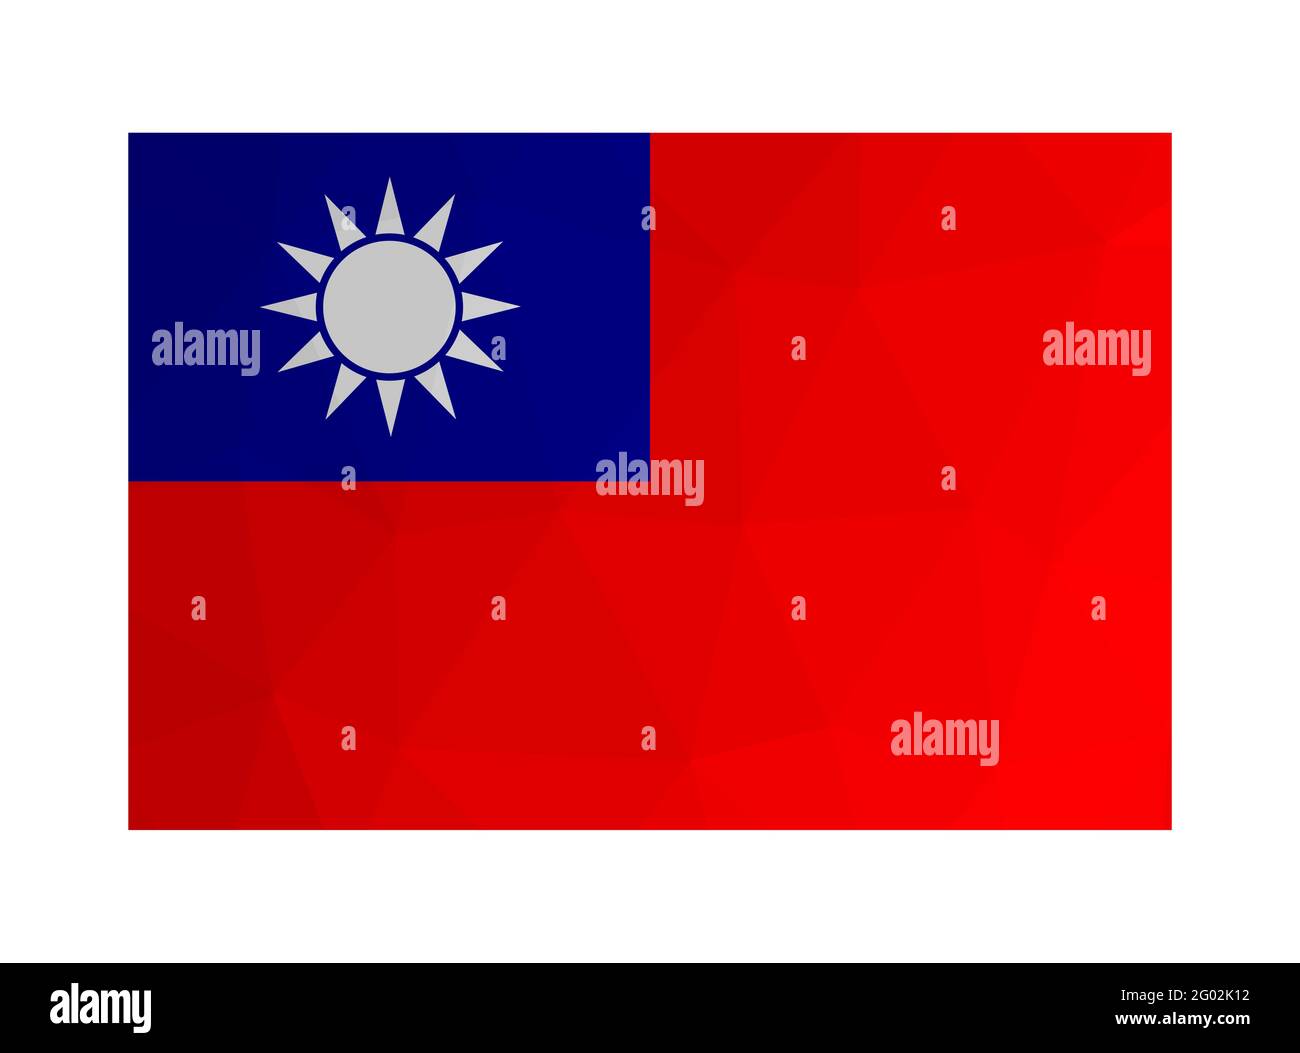 Vector illustration. National Taiwanese flag with blue sky, white sun, red Earth. Official symbol of Taiwan (Republic of China). Design in low poly st Stock Vector